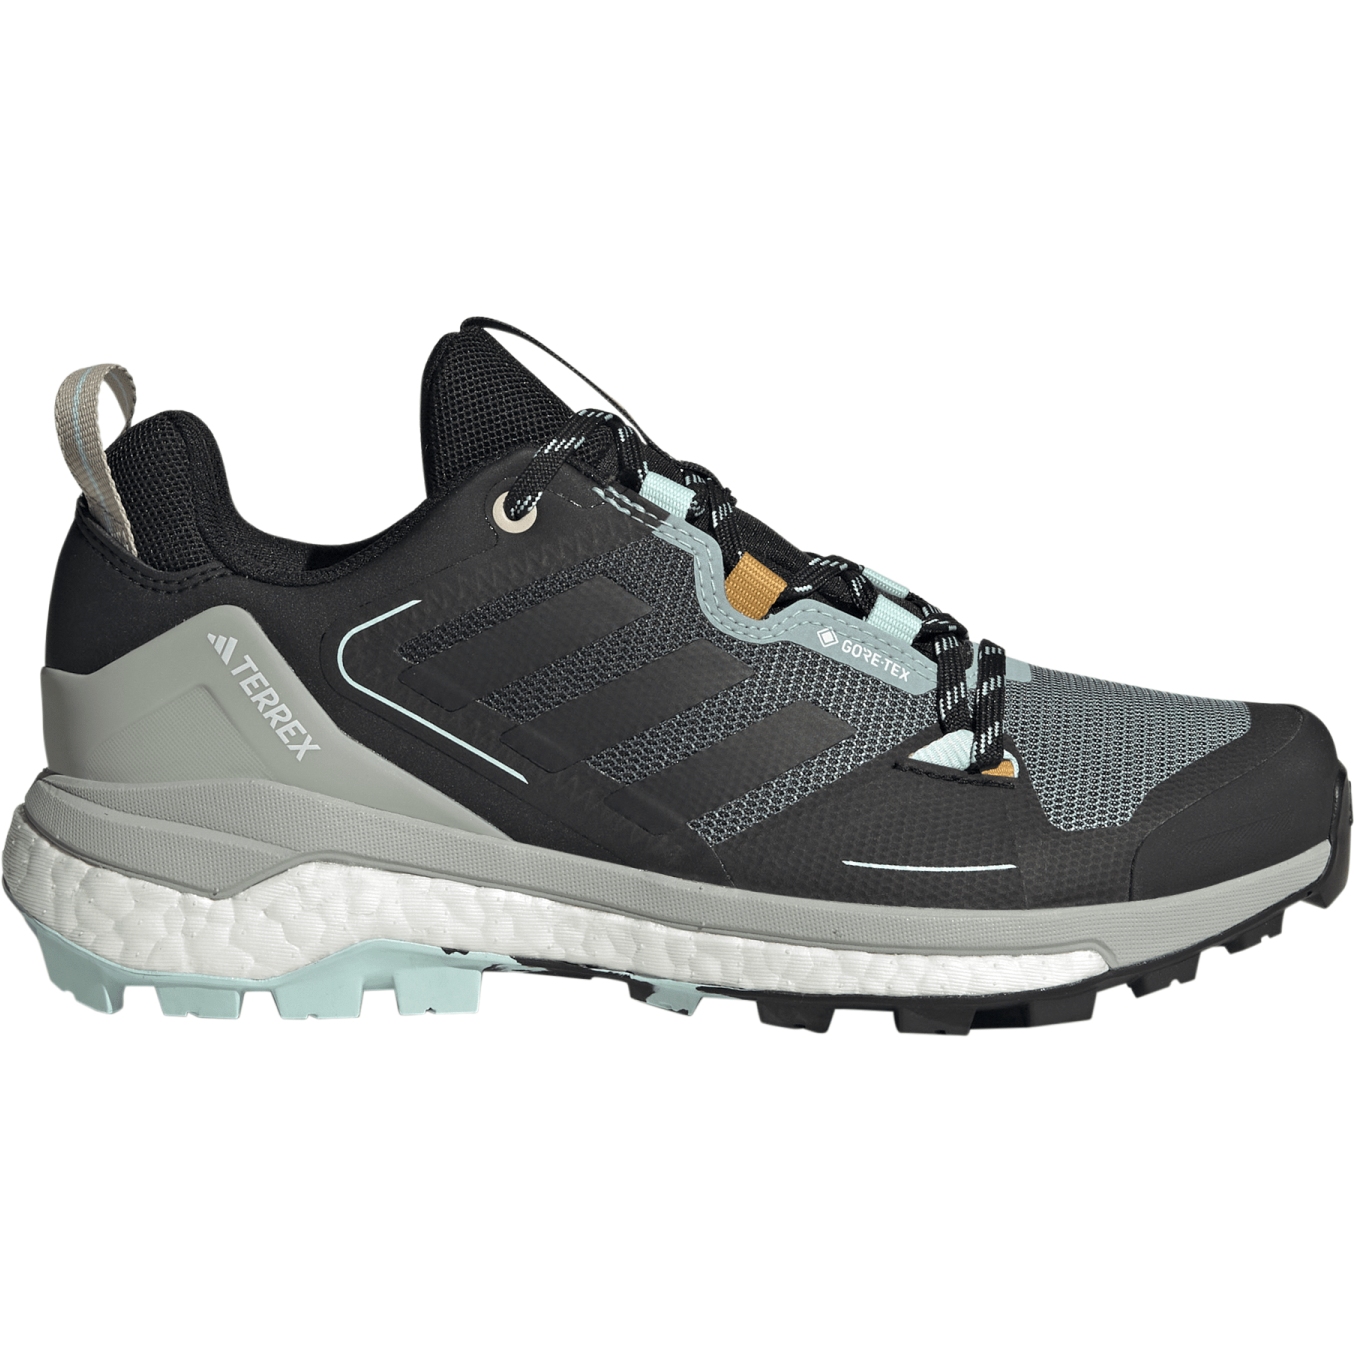 Picture of adidas TERREX Skychaser 2 GORE-TEX Hiking Shoes Women - seflaq/core black/pre yellow IE6895